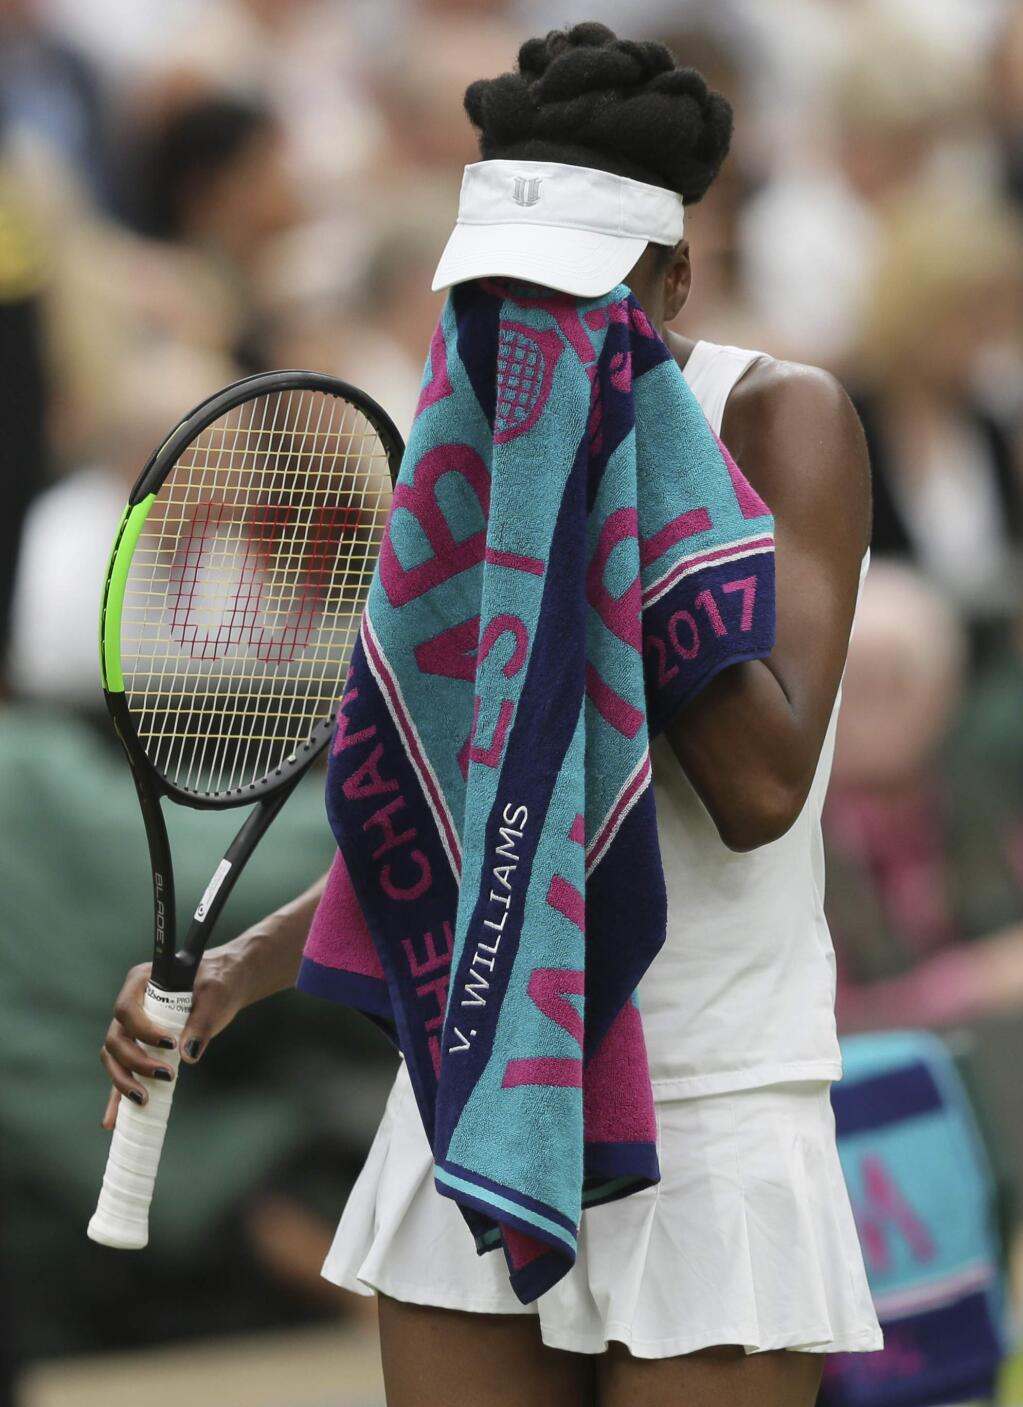 Venus Williams of the United States wipes her face as she plays Spain's Garbine Muguruza during the Women's Singles final match on day twelve at the Wimbledon Tennis Championships in London Saturday, July 15, 2017. (AP Photo/Tim Ireland)